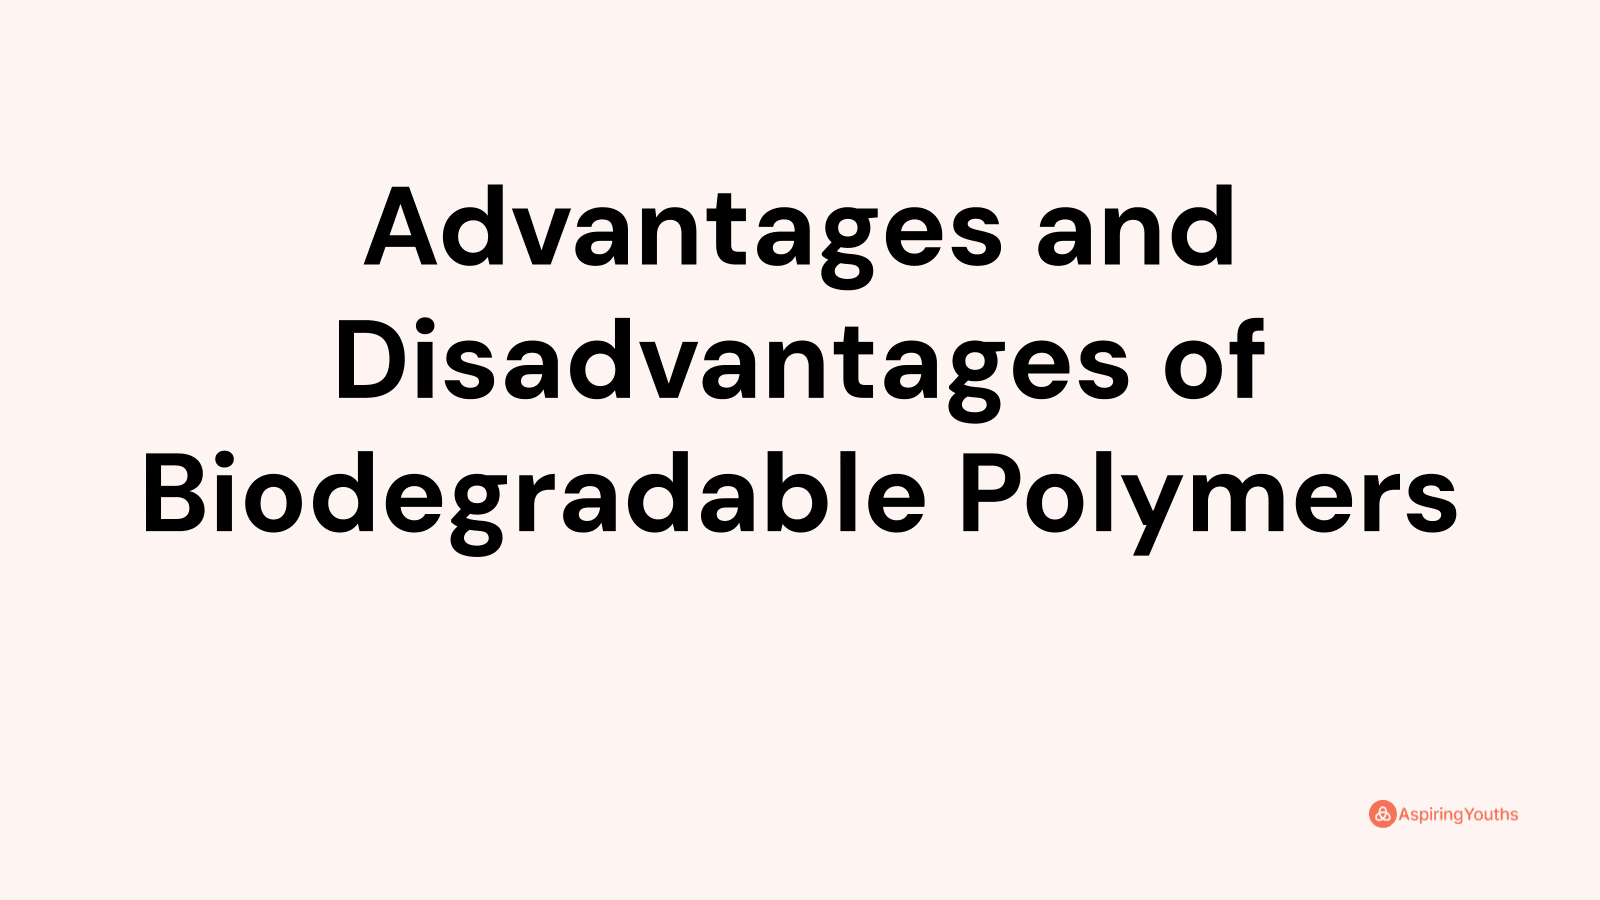 Advantages and disadvantages of Biodegradable Polymers